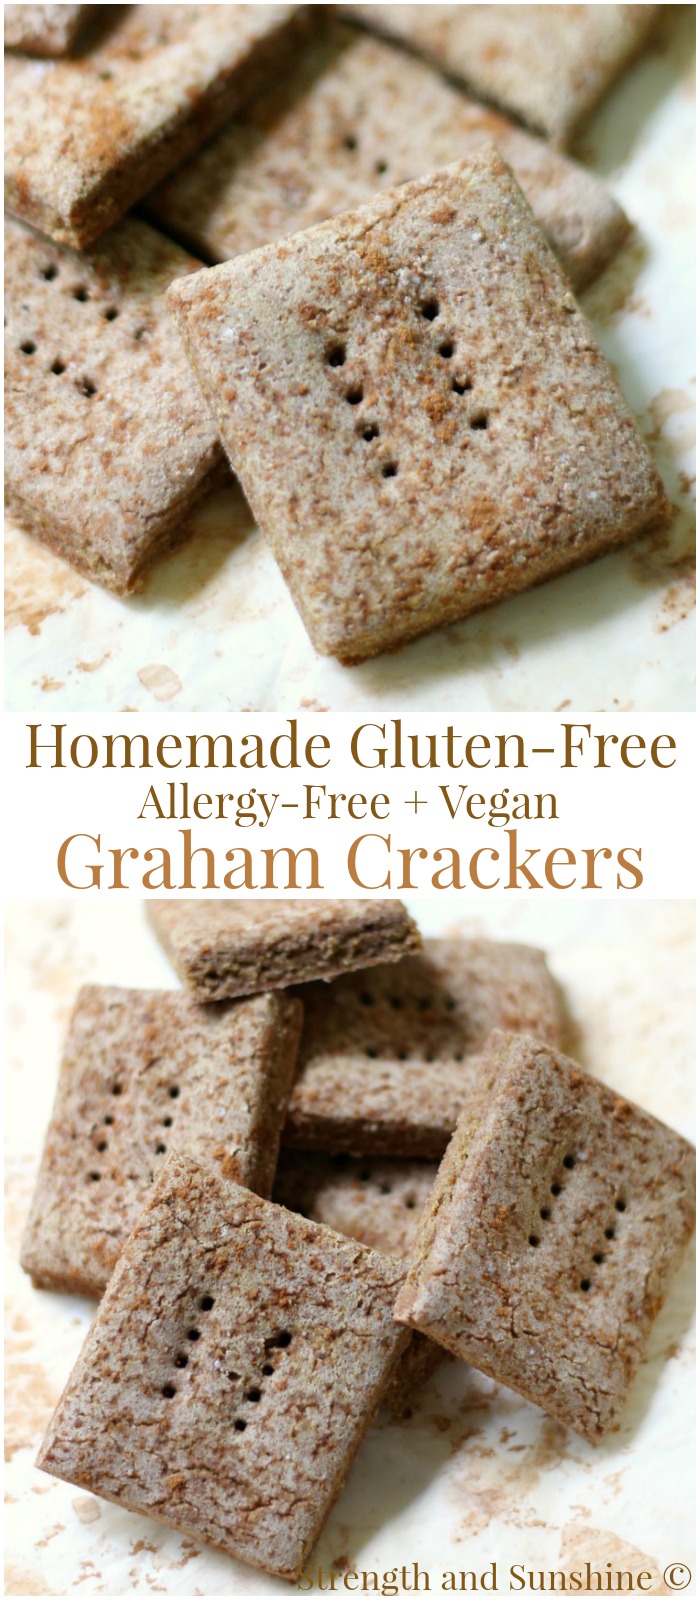 Homemade Gluten-Free Graham Crackers (Allergy-Free, Vegan) | Strength and Sunshine @RebeccaGF666 Celiacs, have no fear! These Homemade Gluten-Free Graham Crackers are just what you've been searching for! Top 8 allergy-free, vegan, and sugar-free, you can enjoy these healthy "cookies" as a quick kid-friendly snack or part of a dessert recipe!